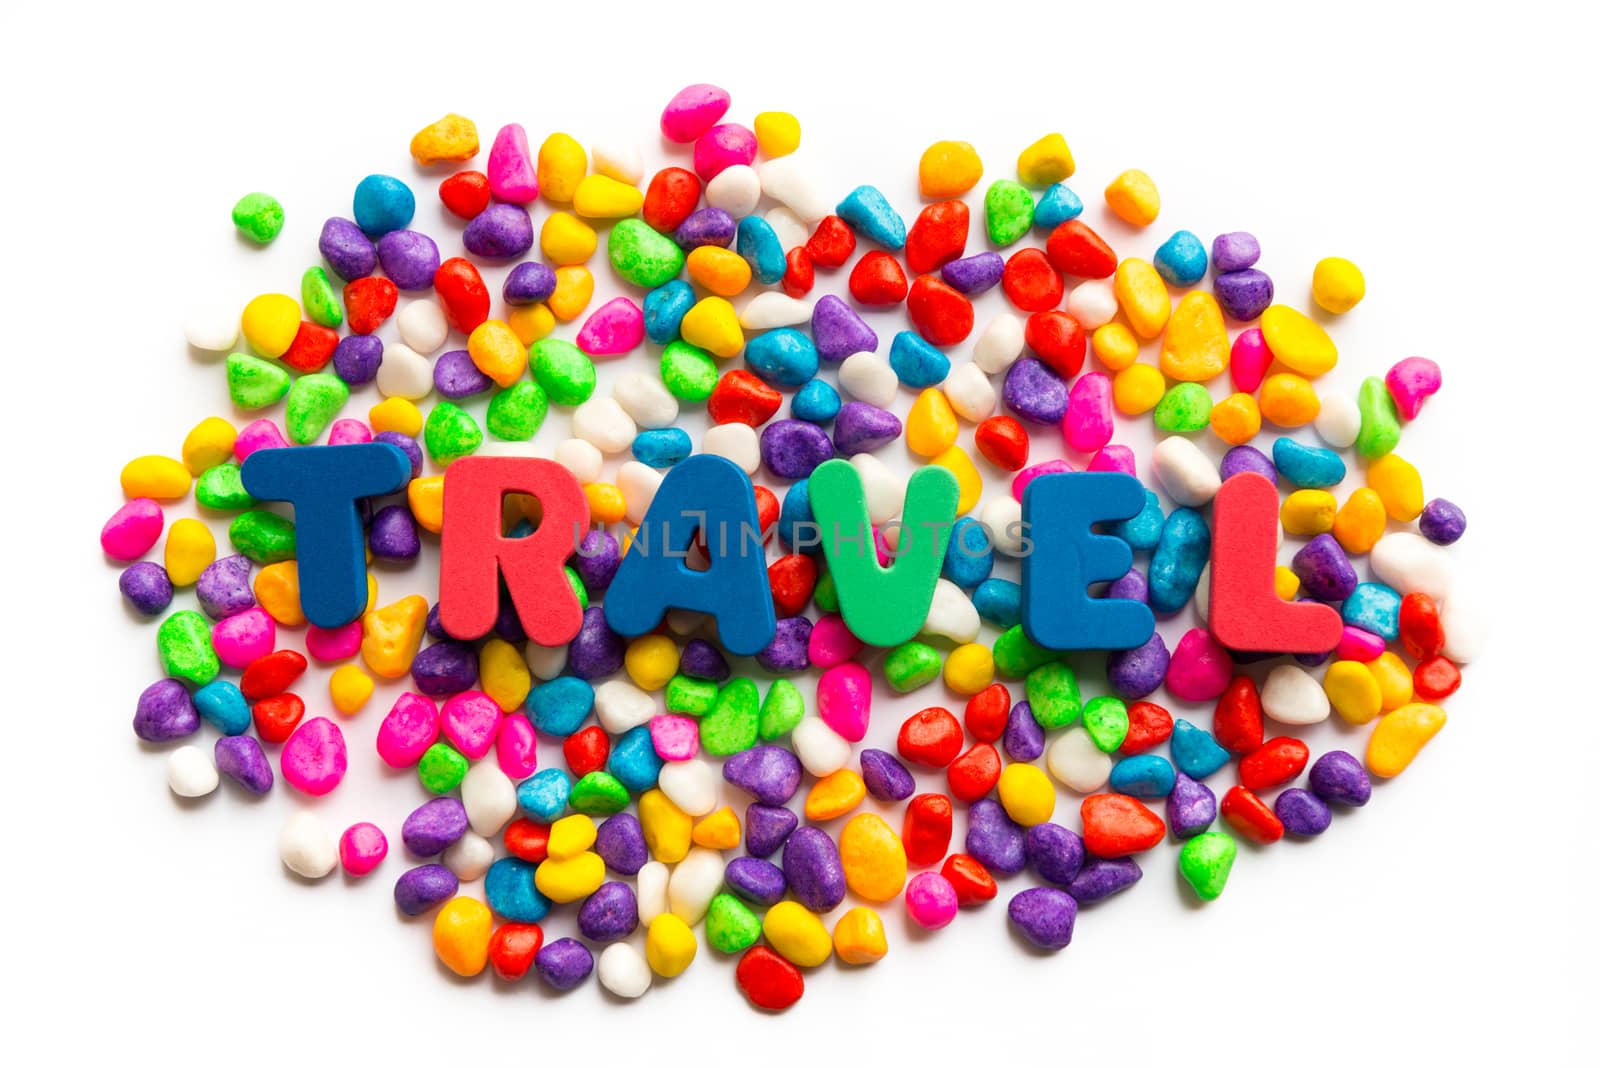 travel word on colorful stone